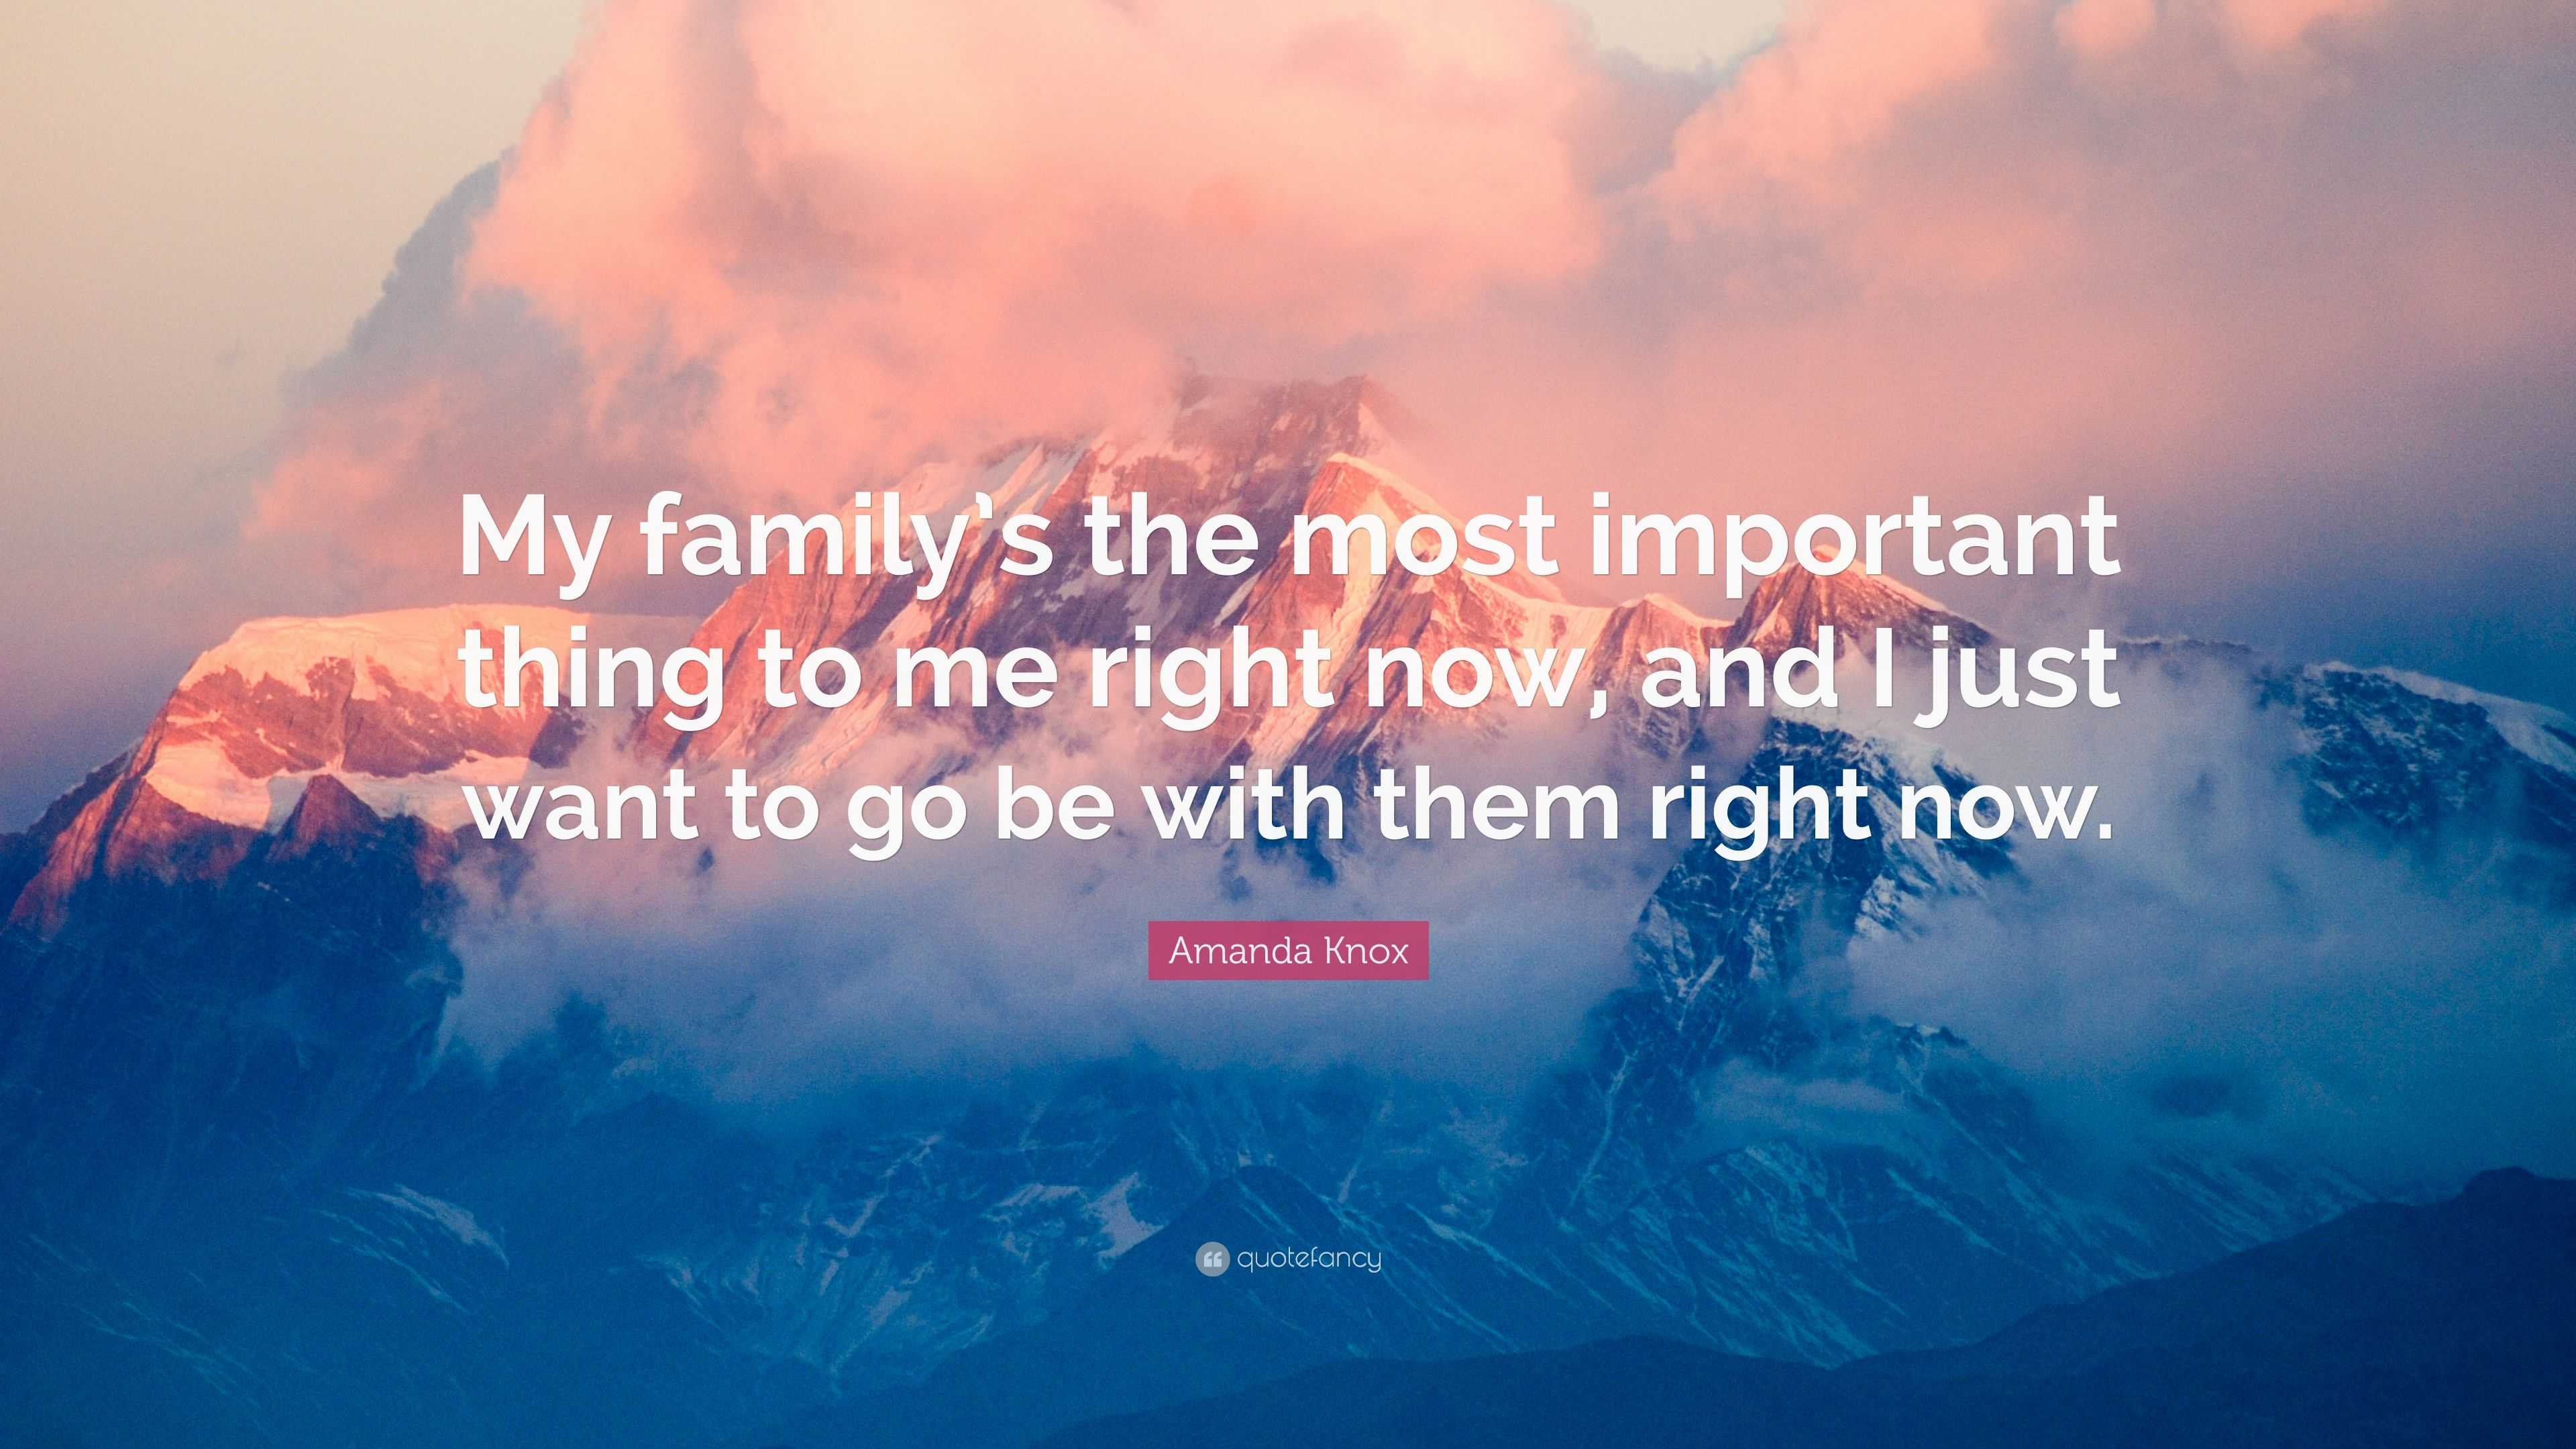 Amanda Knox Quote: “My family’s the most important thing to me right ...